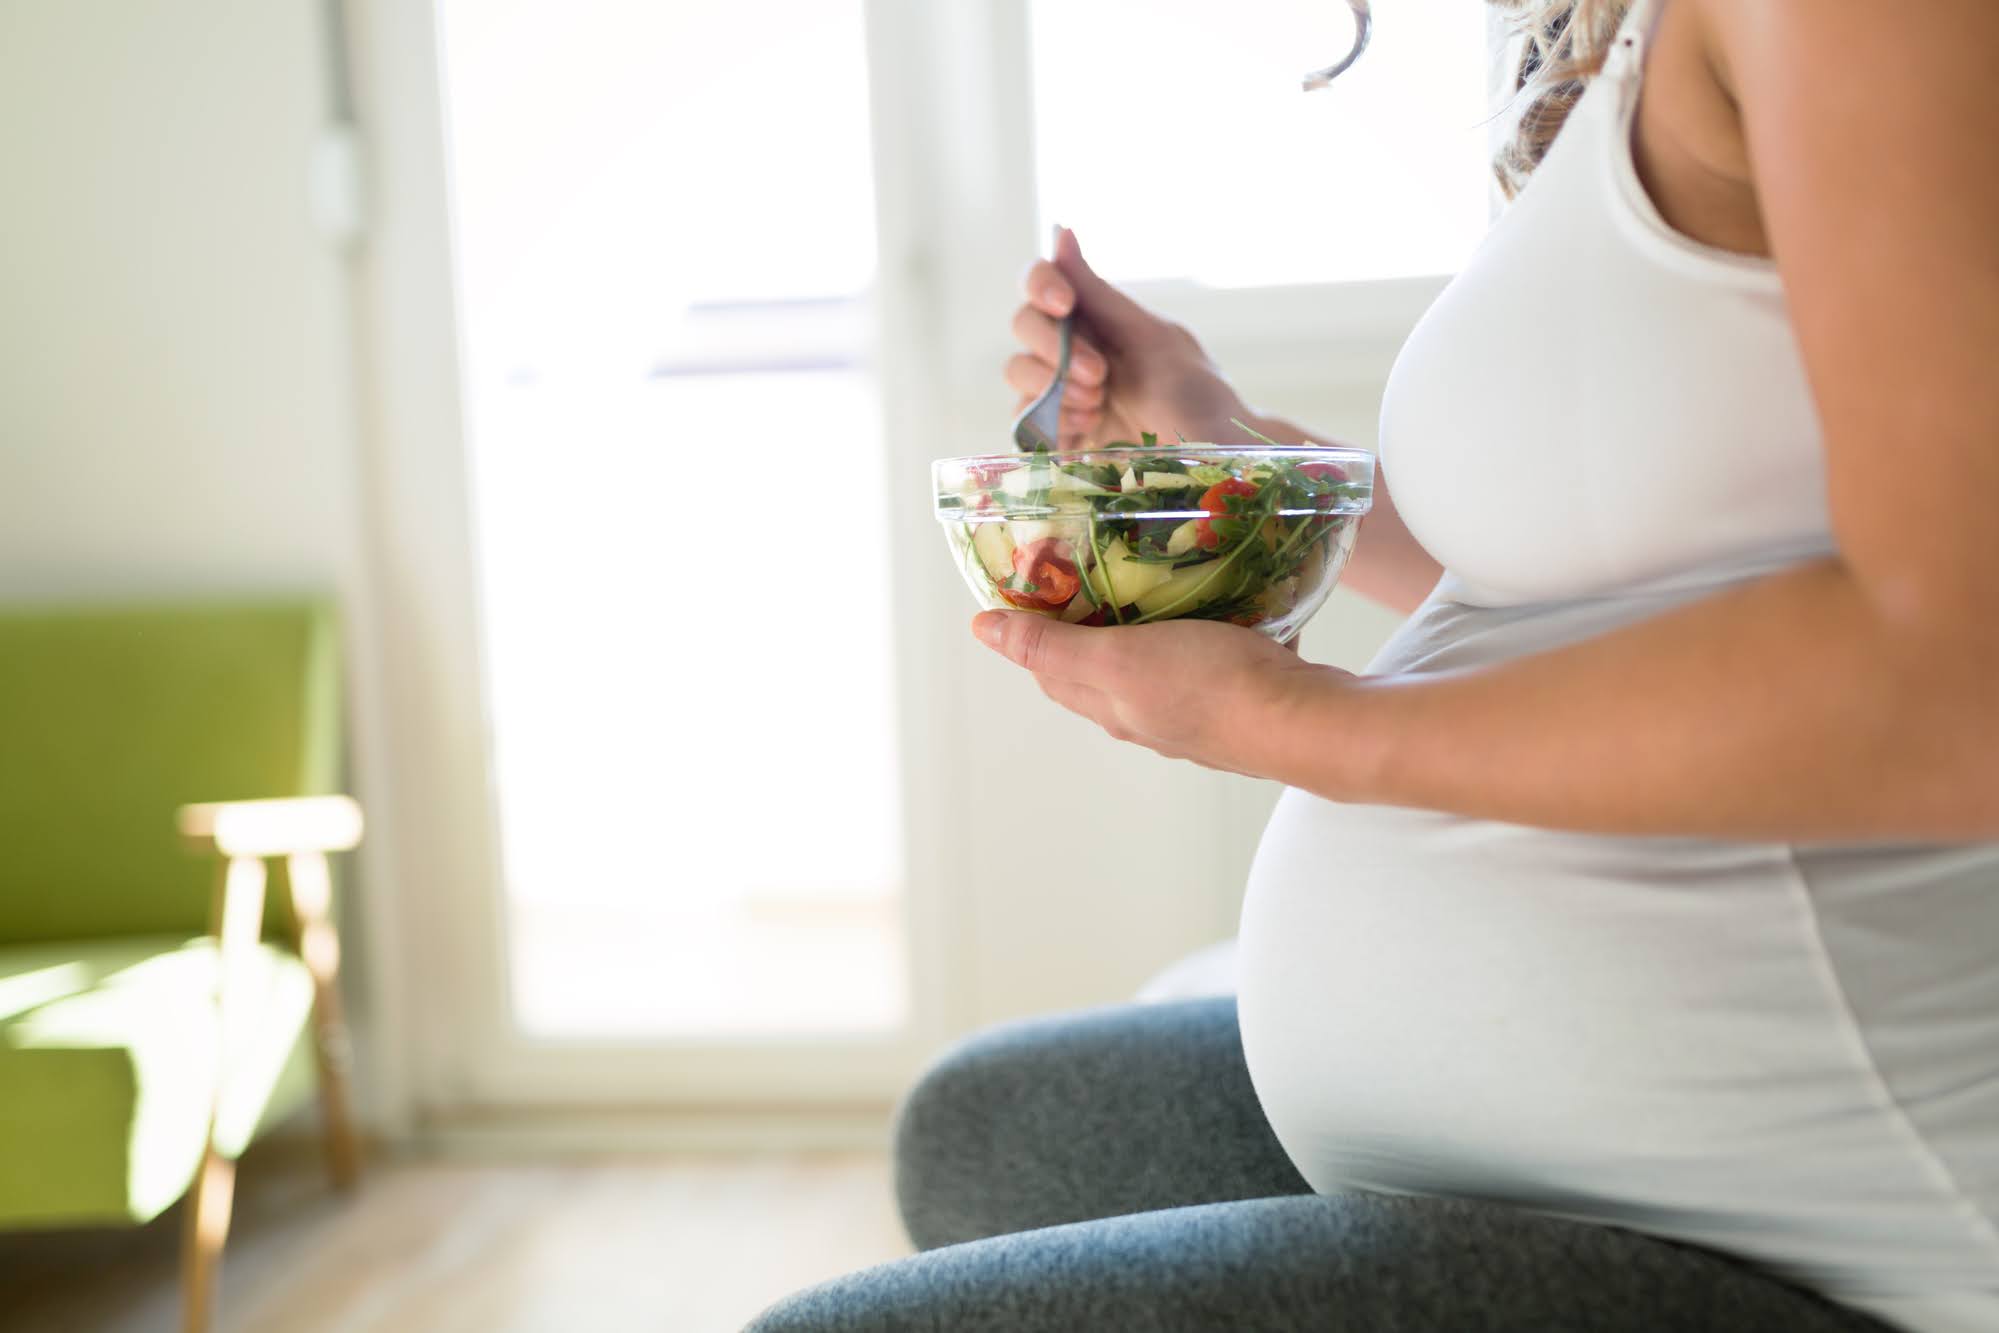 Diets, Calories, Food Choices, and Pregnancy